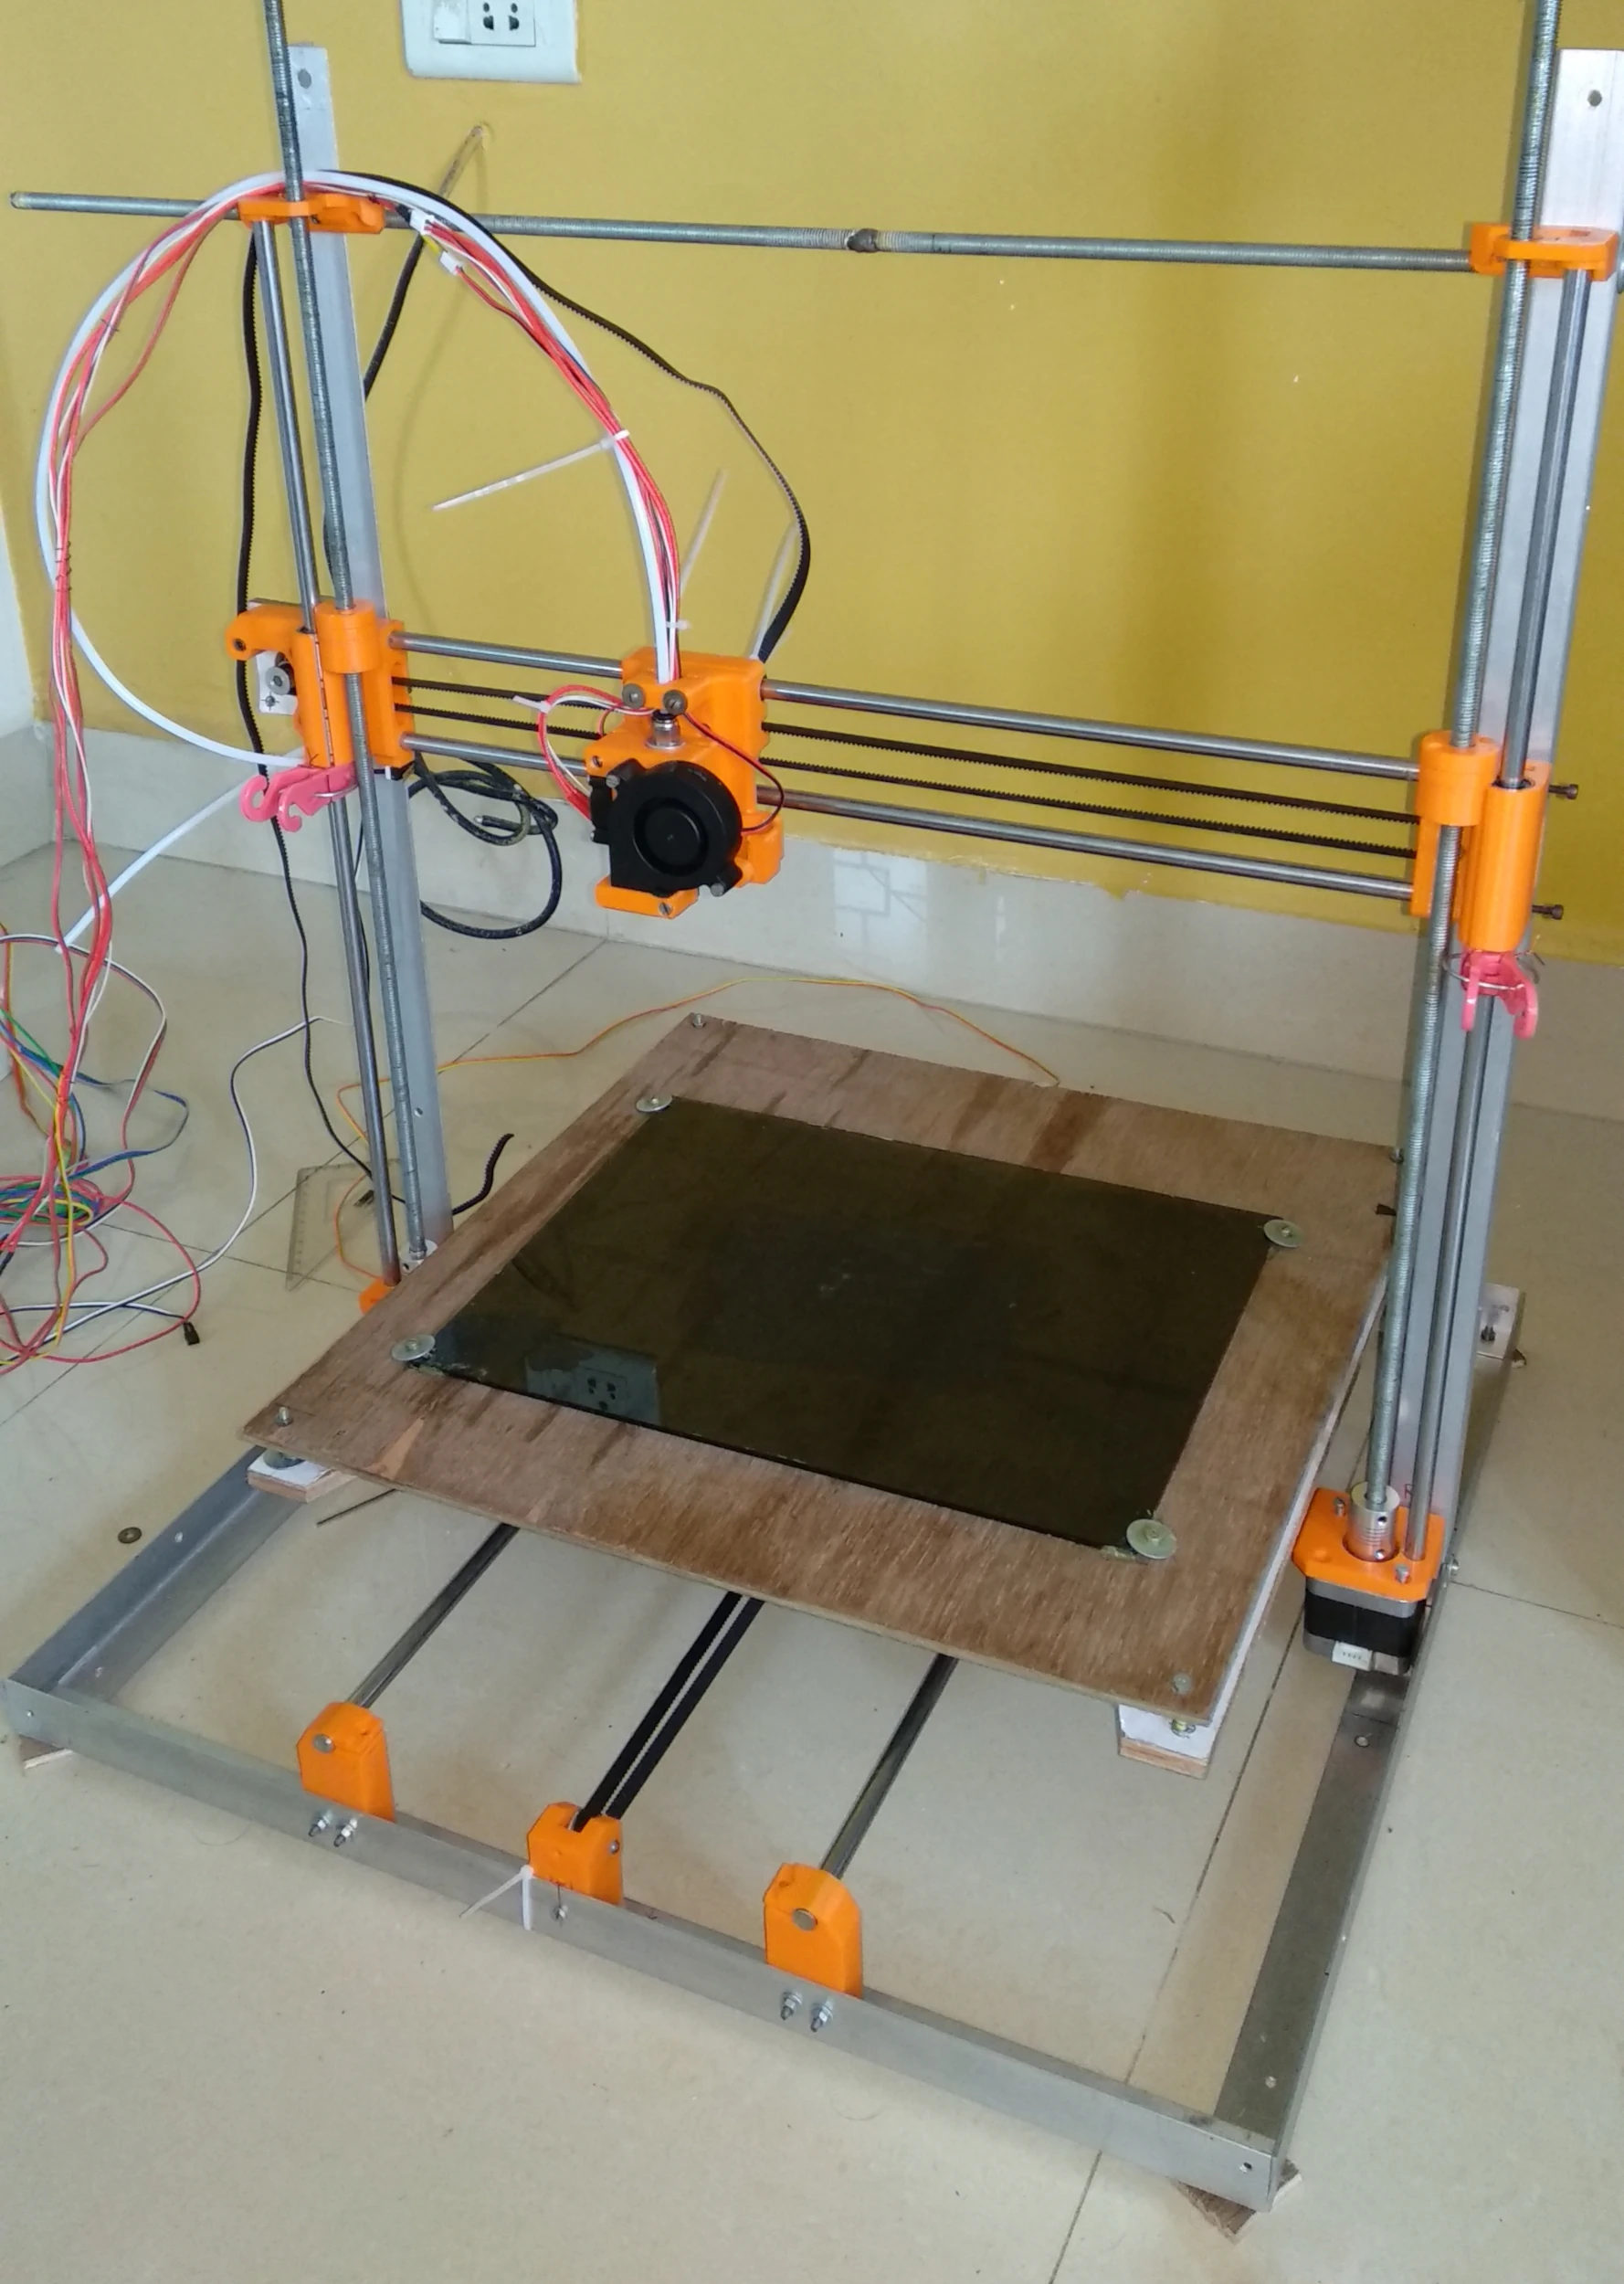 First assembly of the printer